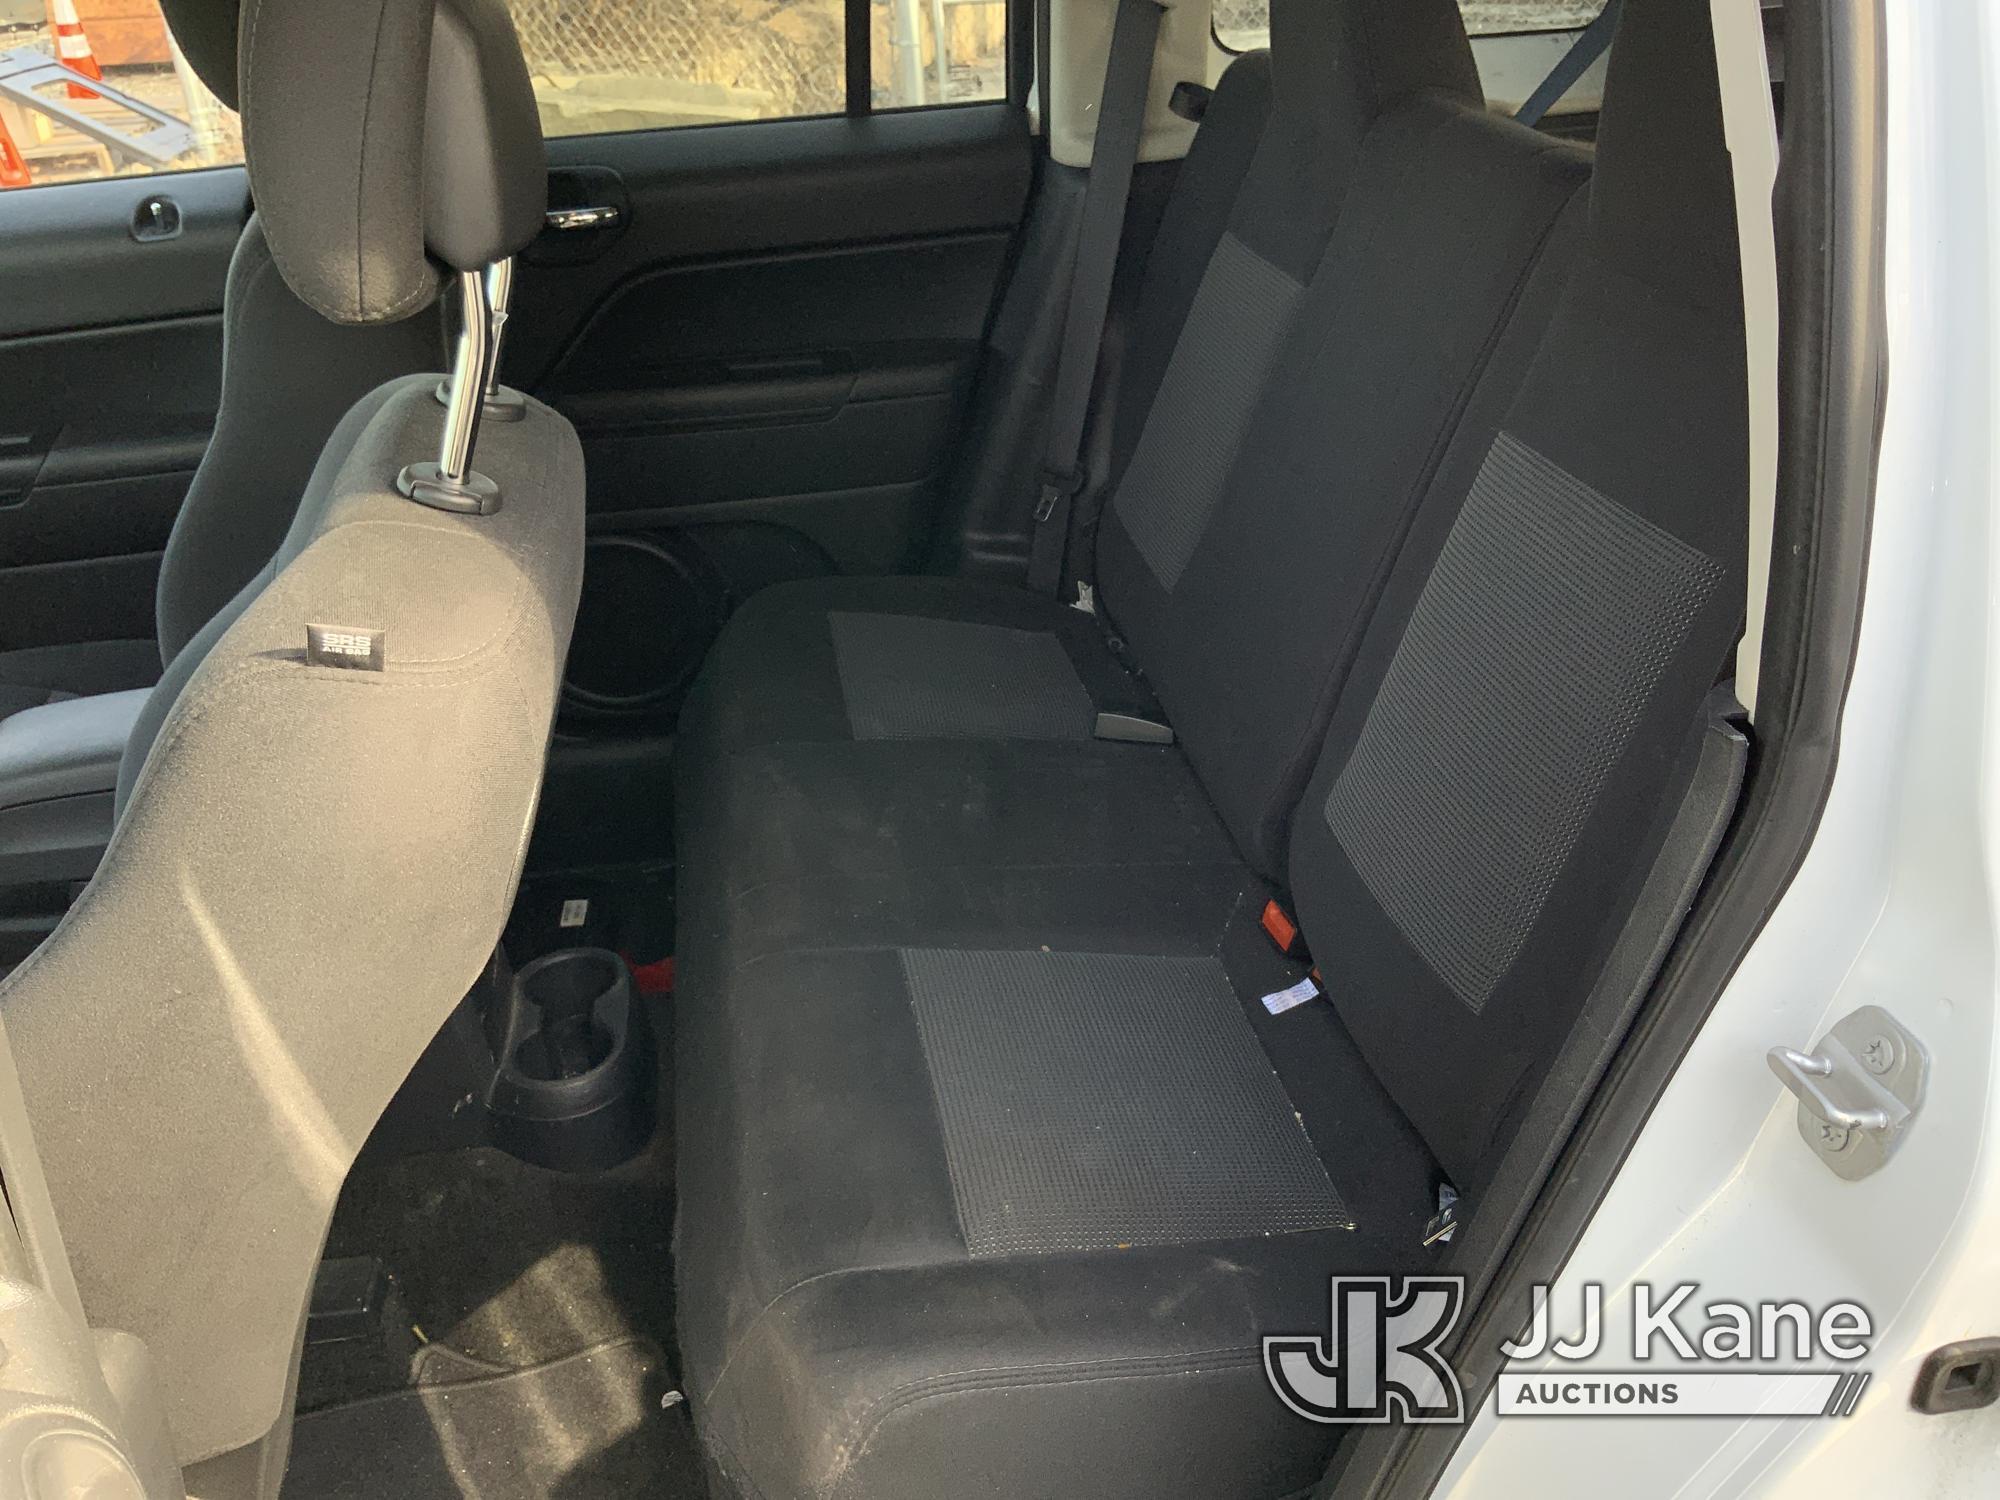 (Plymouth Meeting, PA) 2015 Jeep Patriot 4x4 4-Door Sport Utility Vehicle Runs & Moves, Check Engine